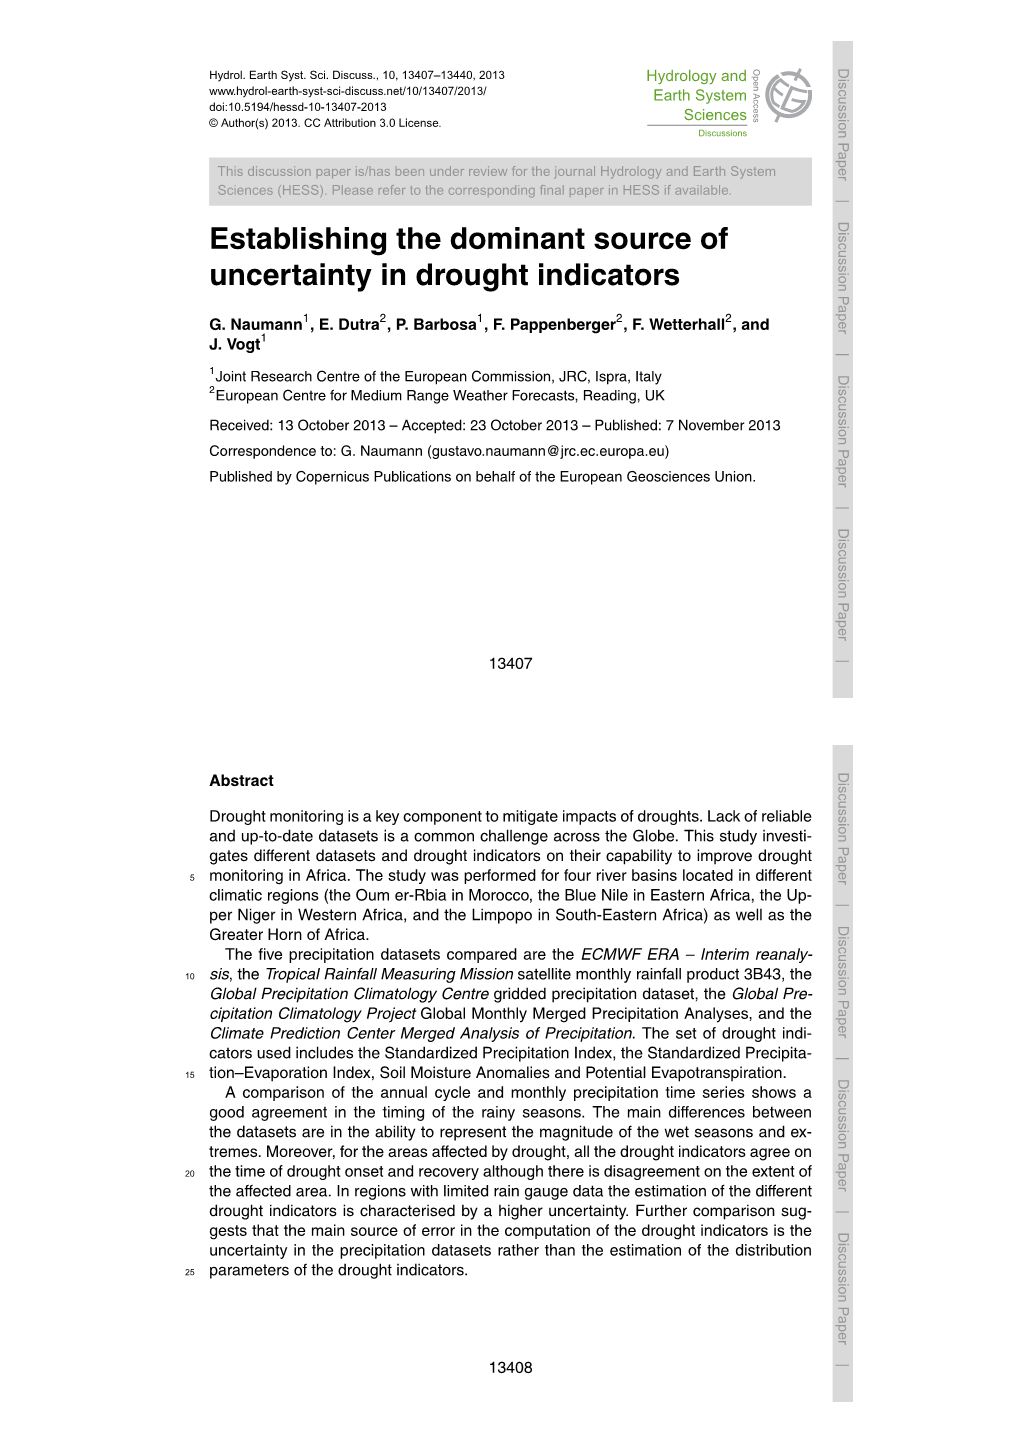 Establishing the Dominant Source of Uncertainty in Drought Indicators G